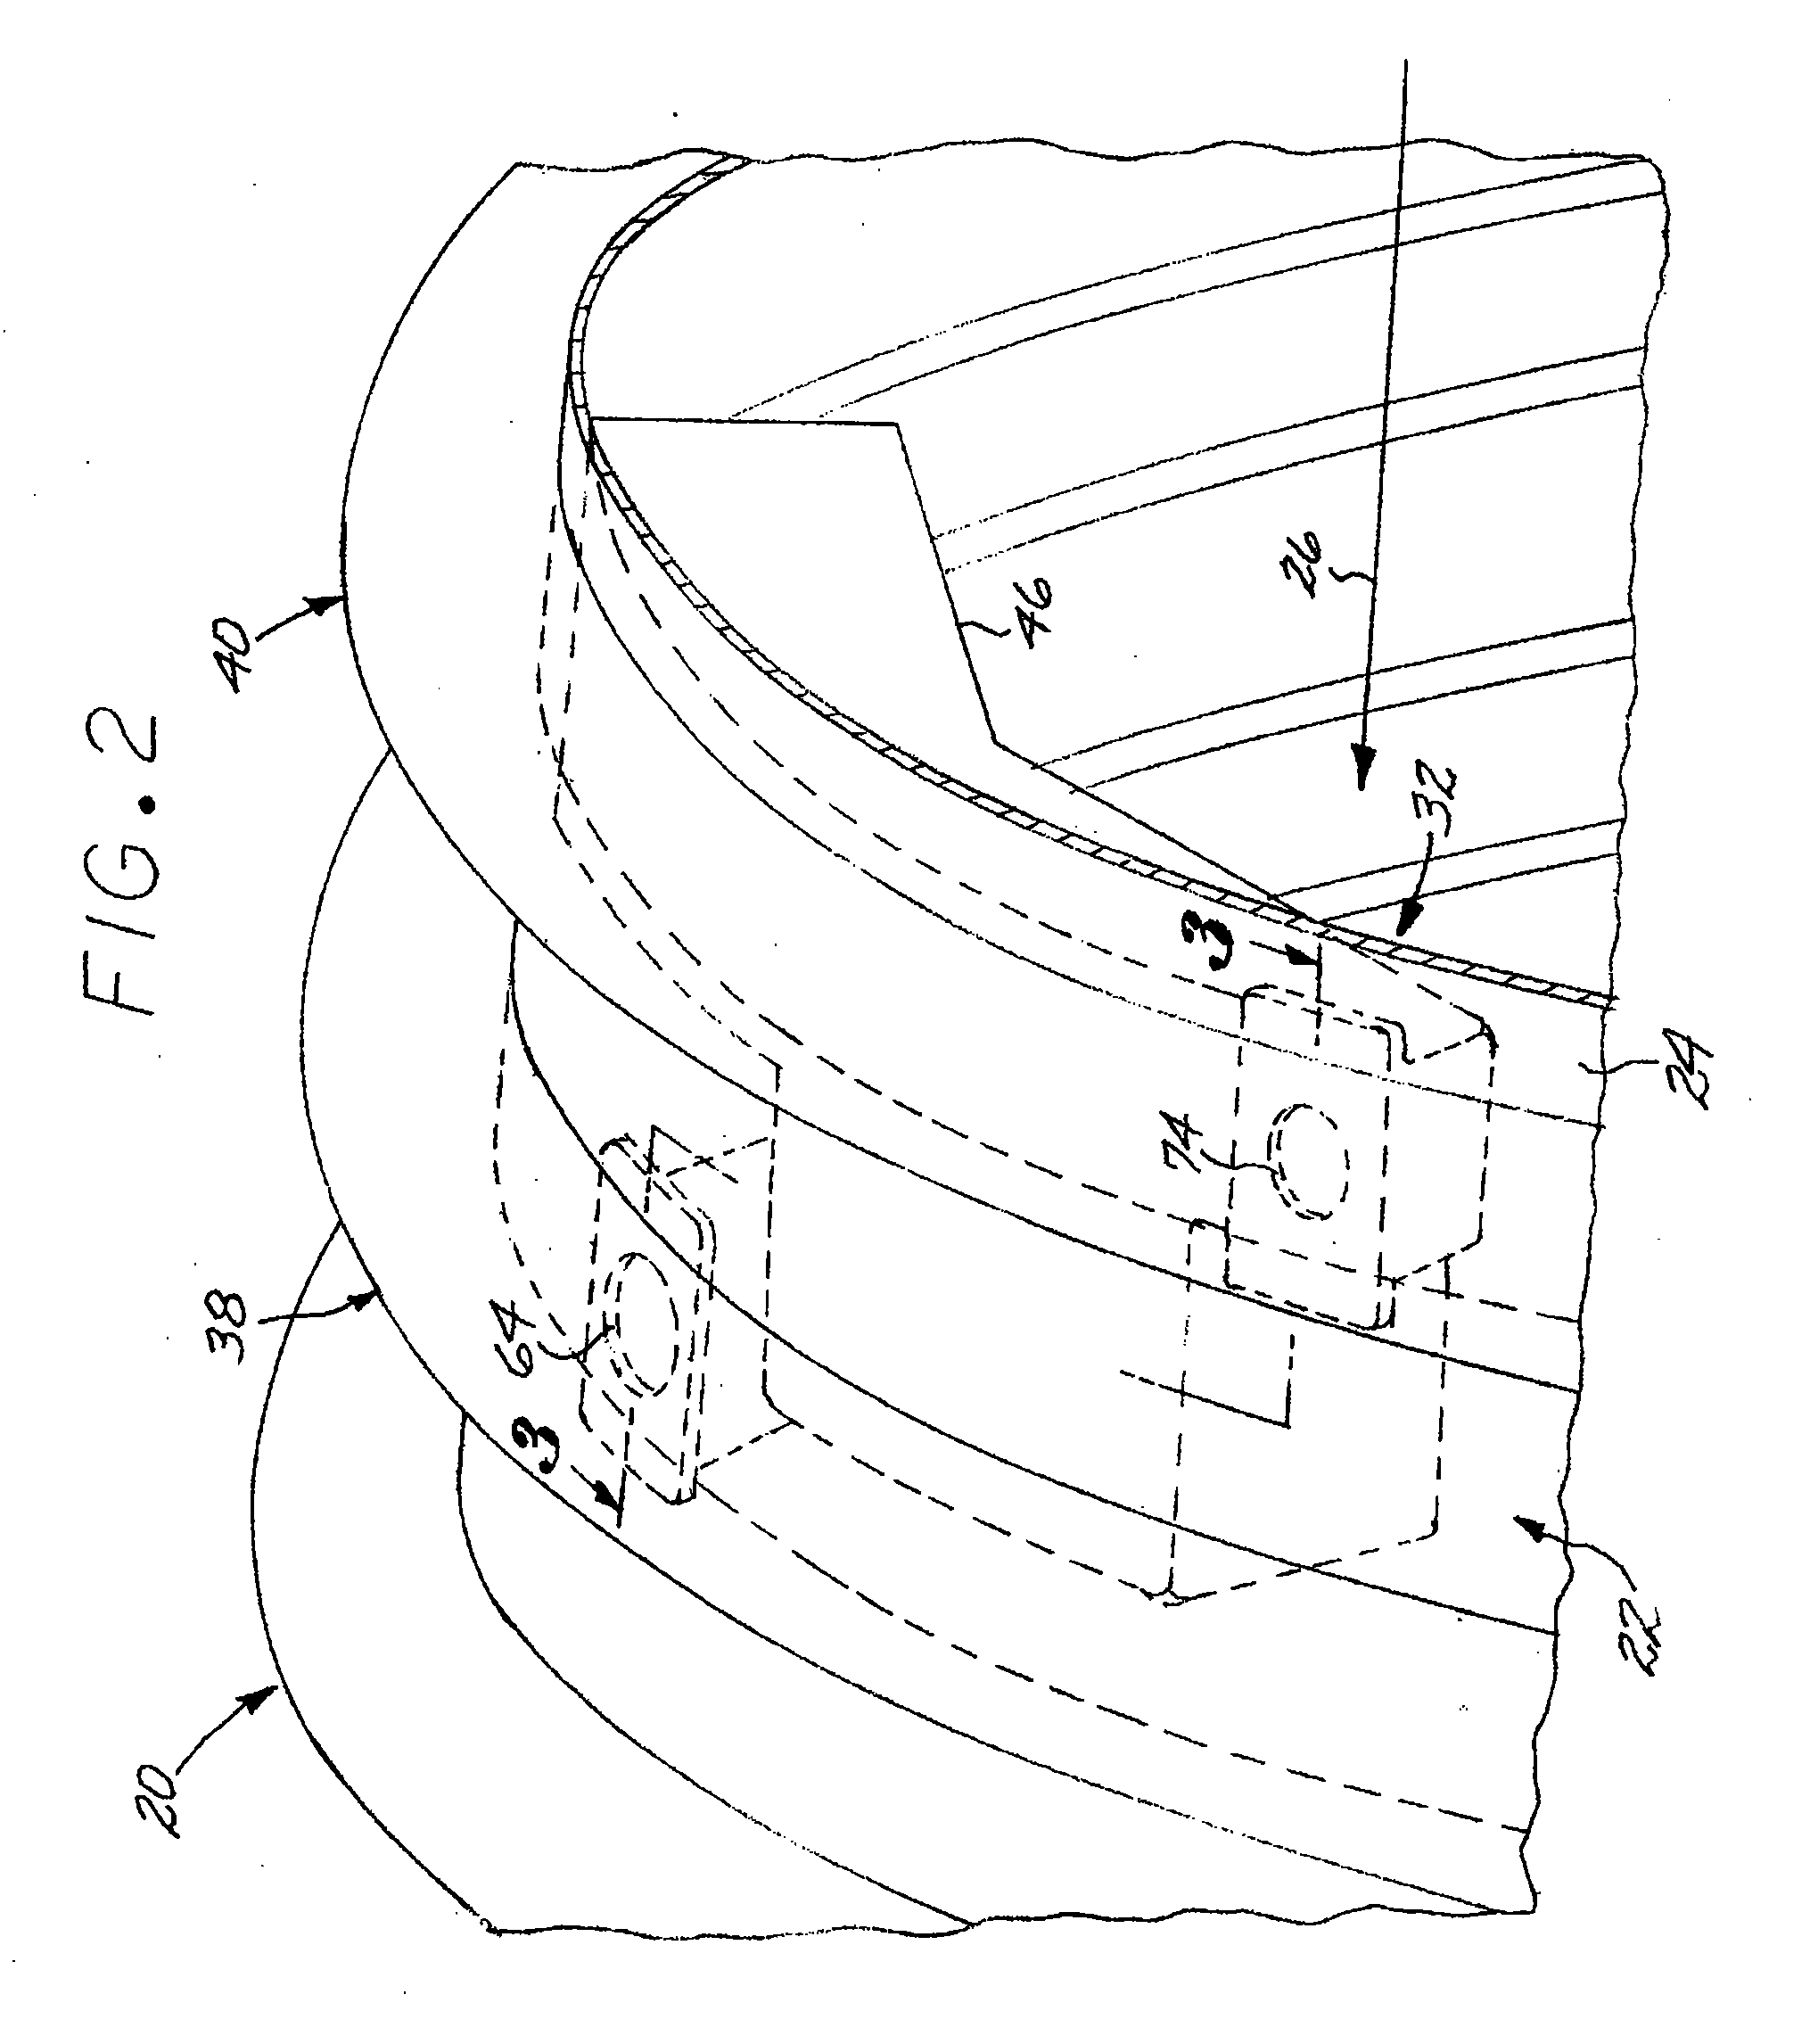 Heat exchanger system having manifolds structurally integrated with a duct